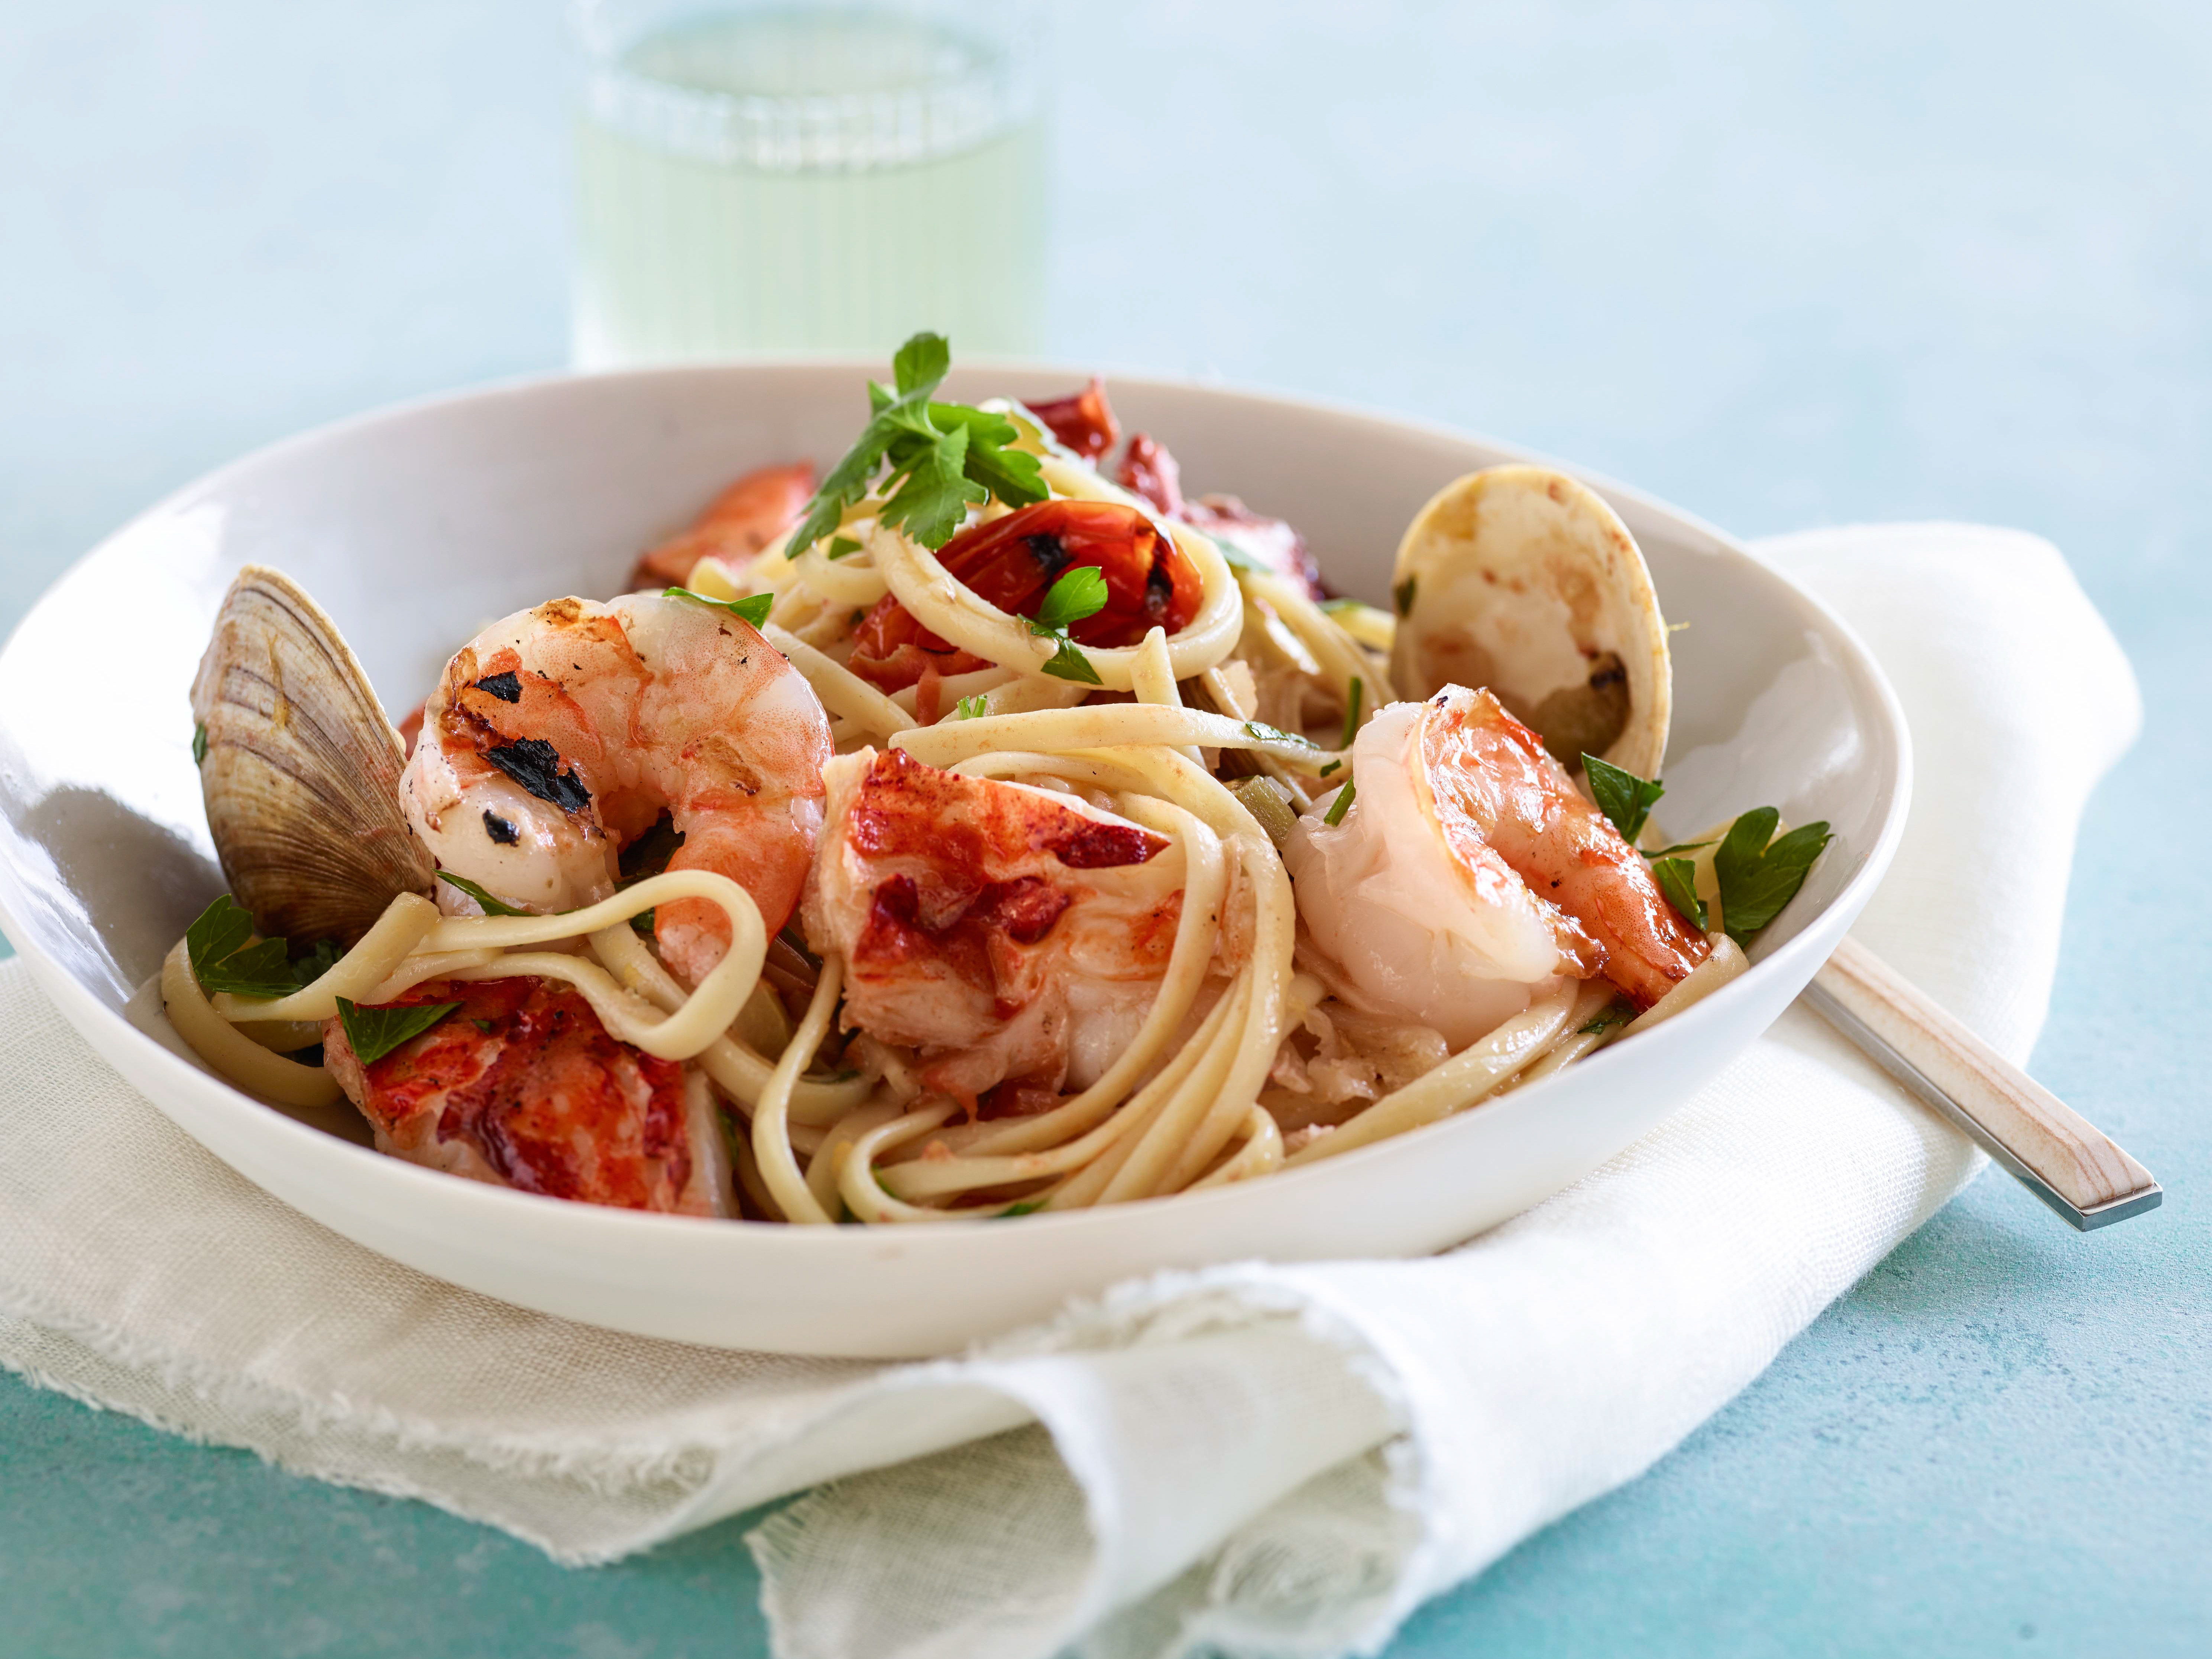 GH0602H_grilled-seafood-pasta-fra-diavolo-recipe_s4x3